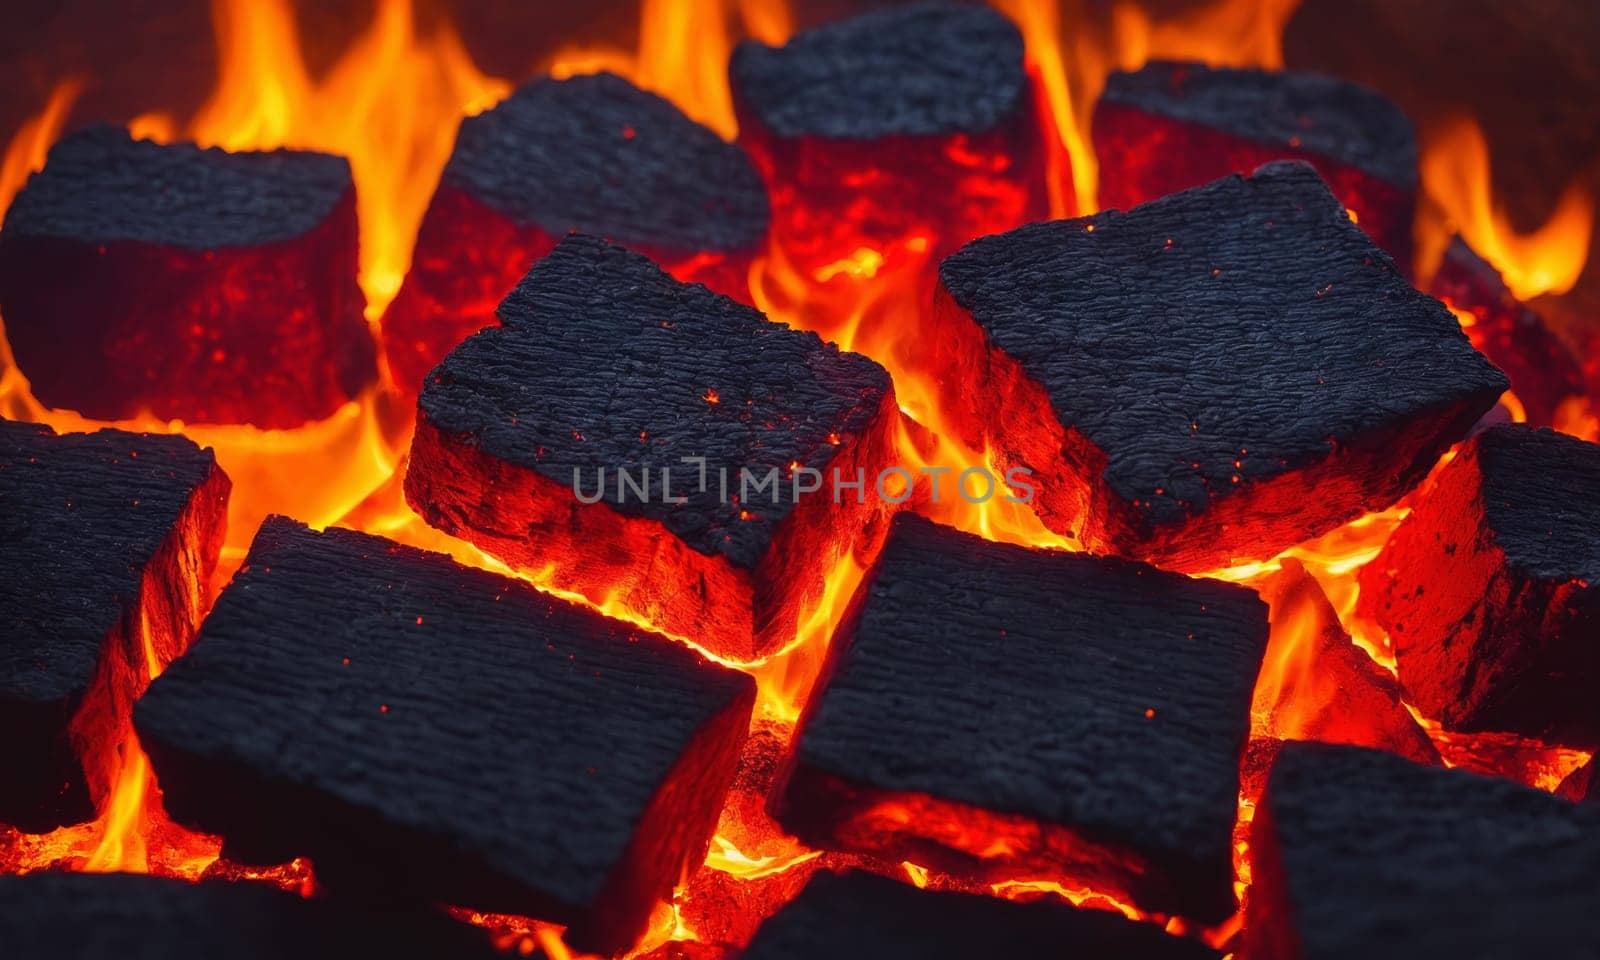 High view of burning coals in the background by Andre1ns